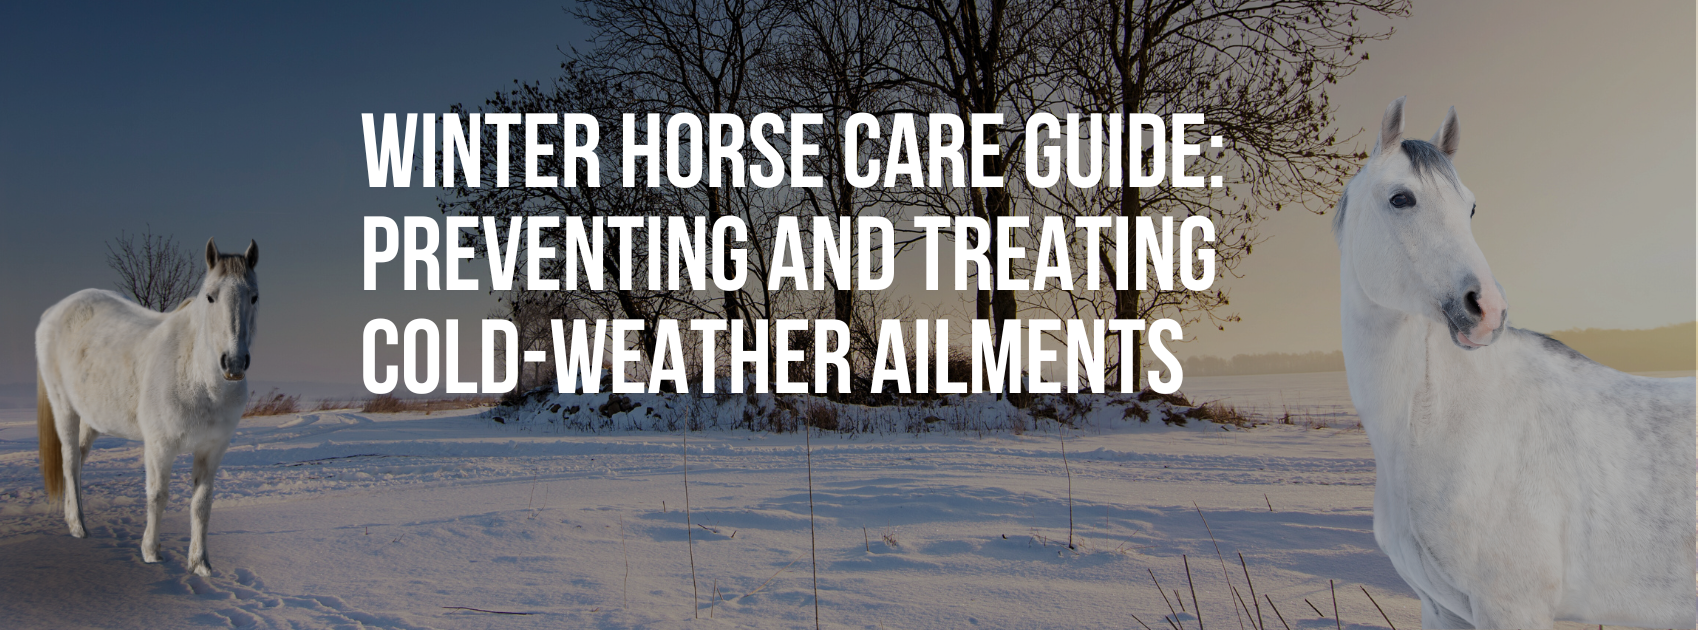 Winter Horse Care Guide: Preventing and Treating Cold-Weather Ailments